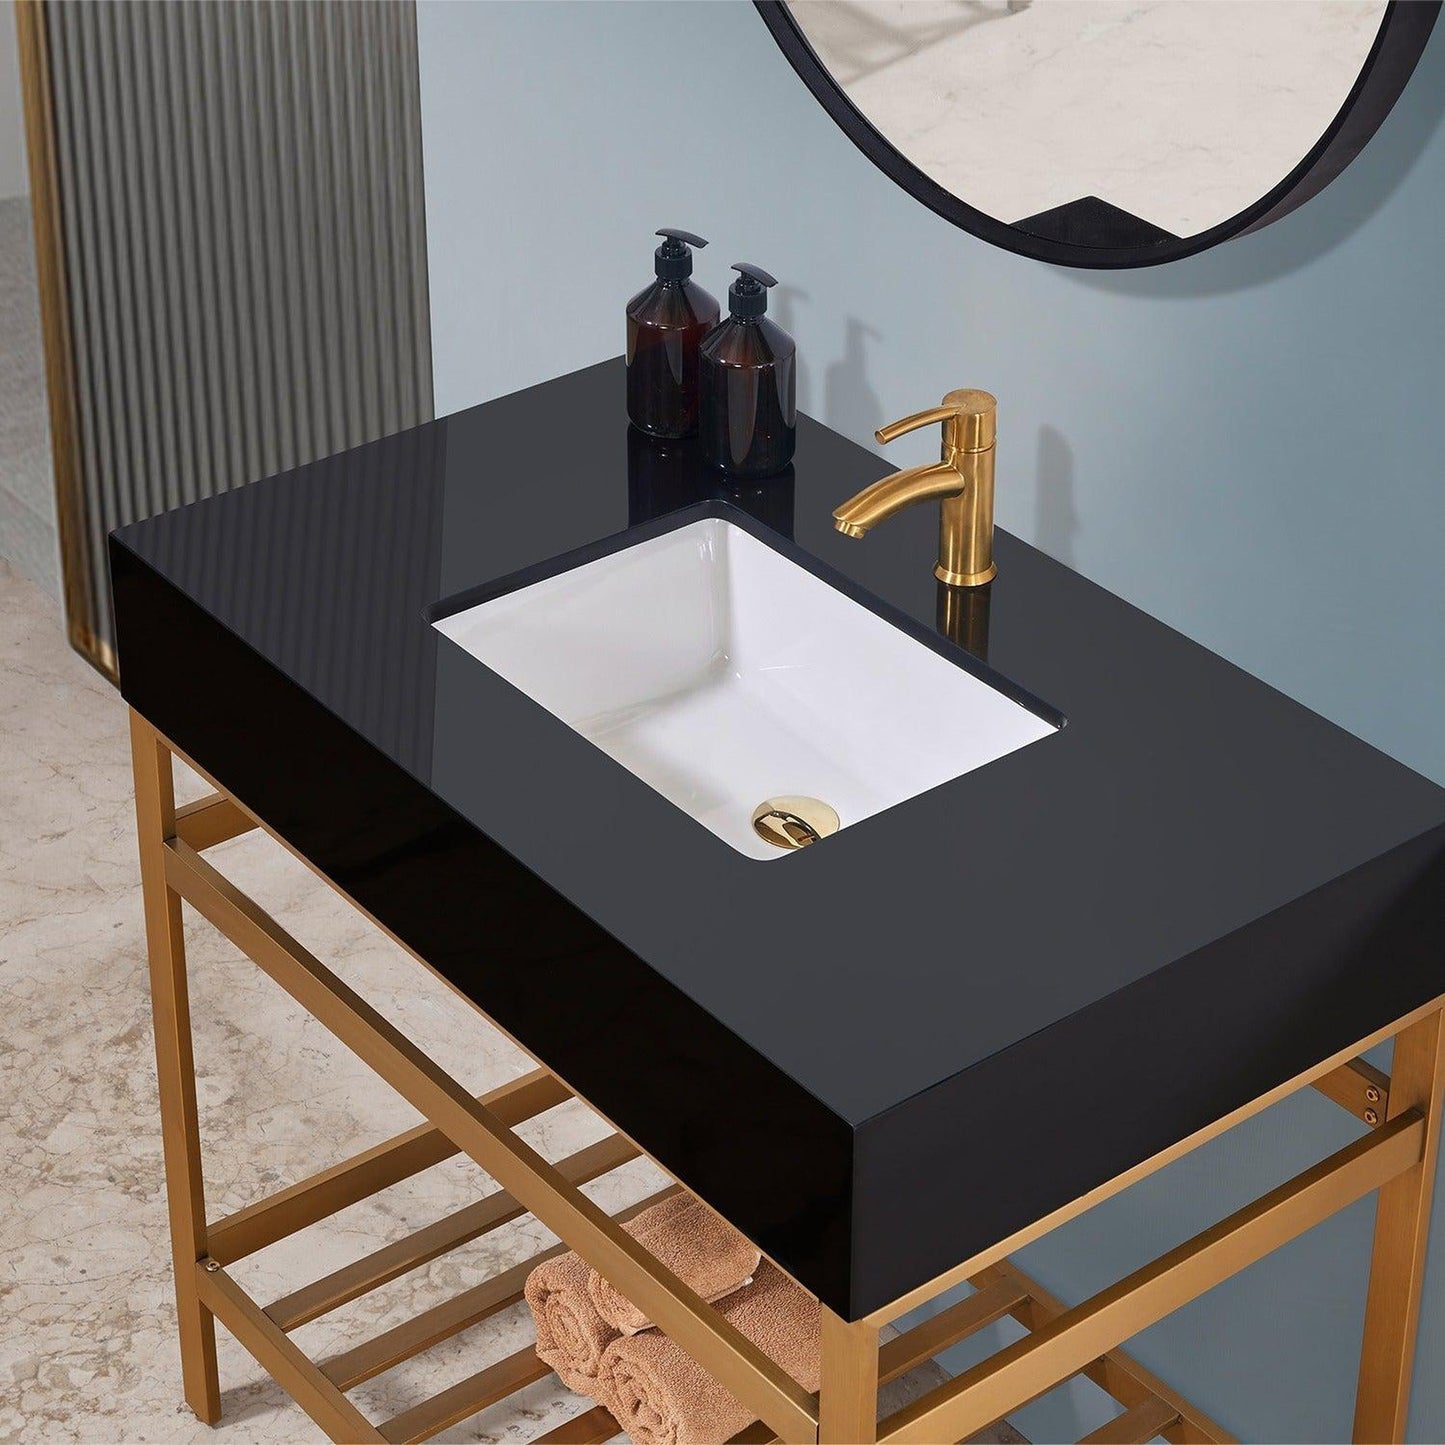 Altair Nauders 36" Brushed Gold Single Stainless Steel Bathroom Vanity Set Console With Mirror, Imperial Black Stone Top, Single Rectangular Undermount Ceramic Sink, and Safety Overflow Hole